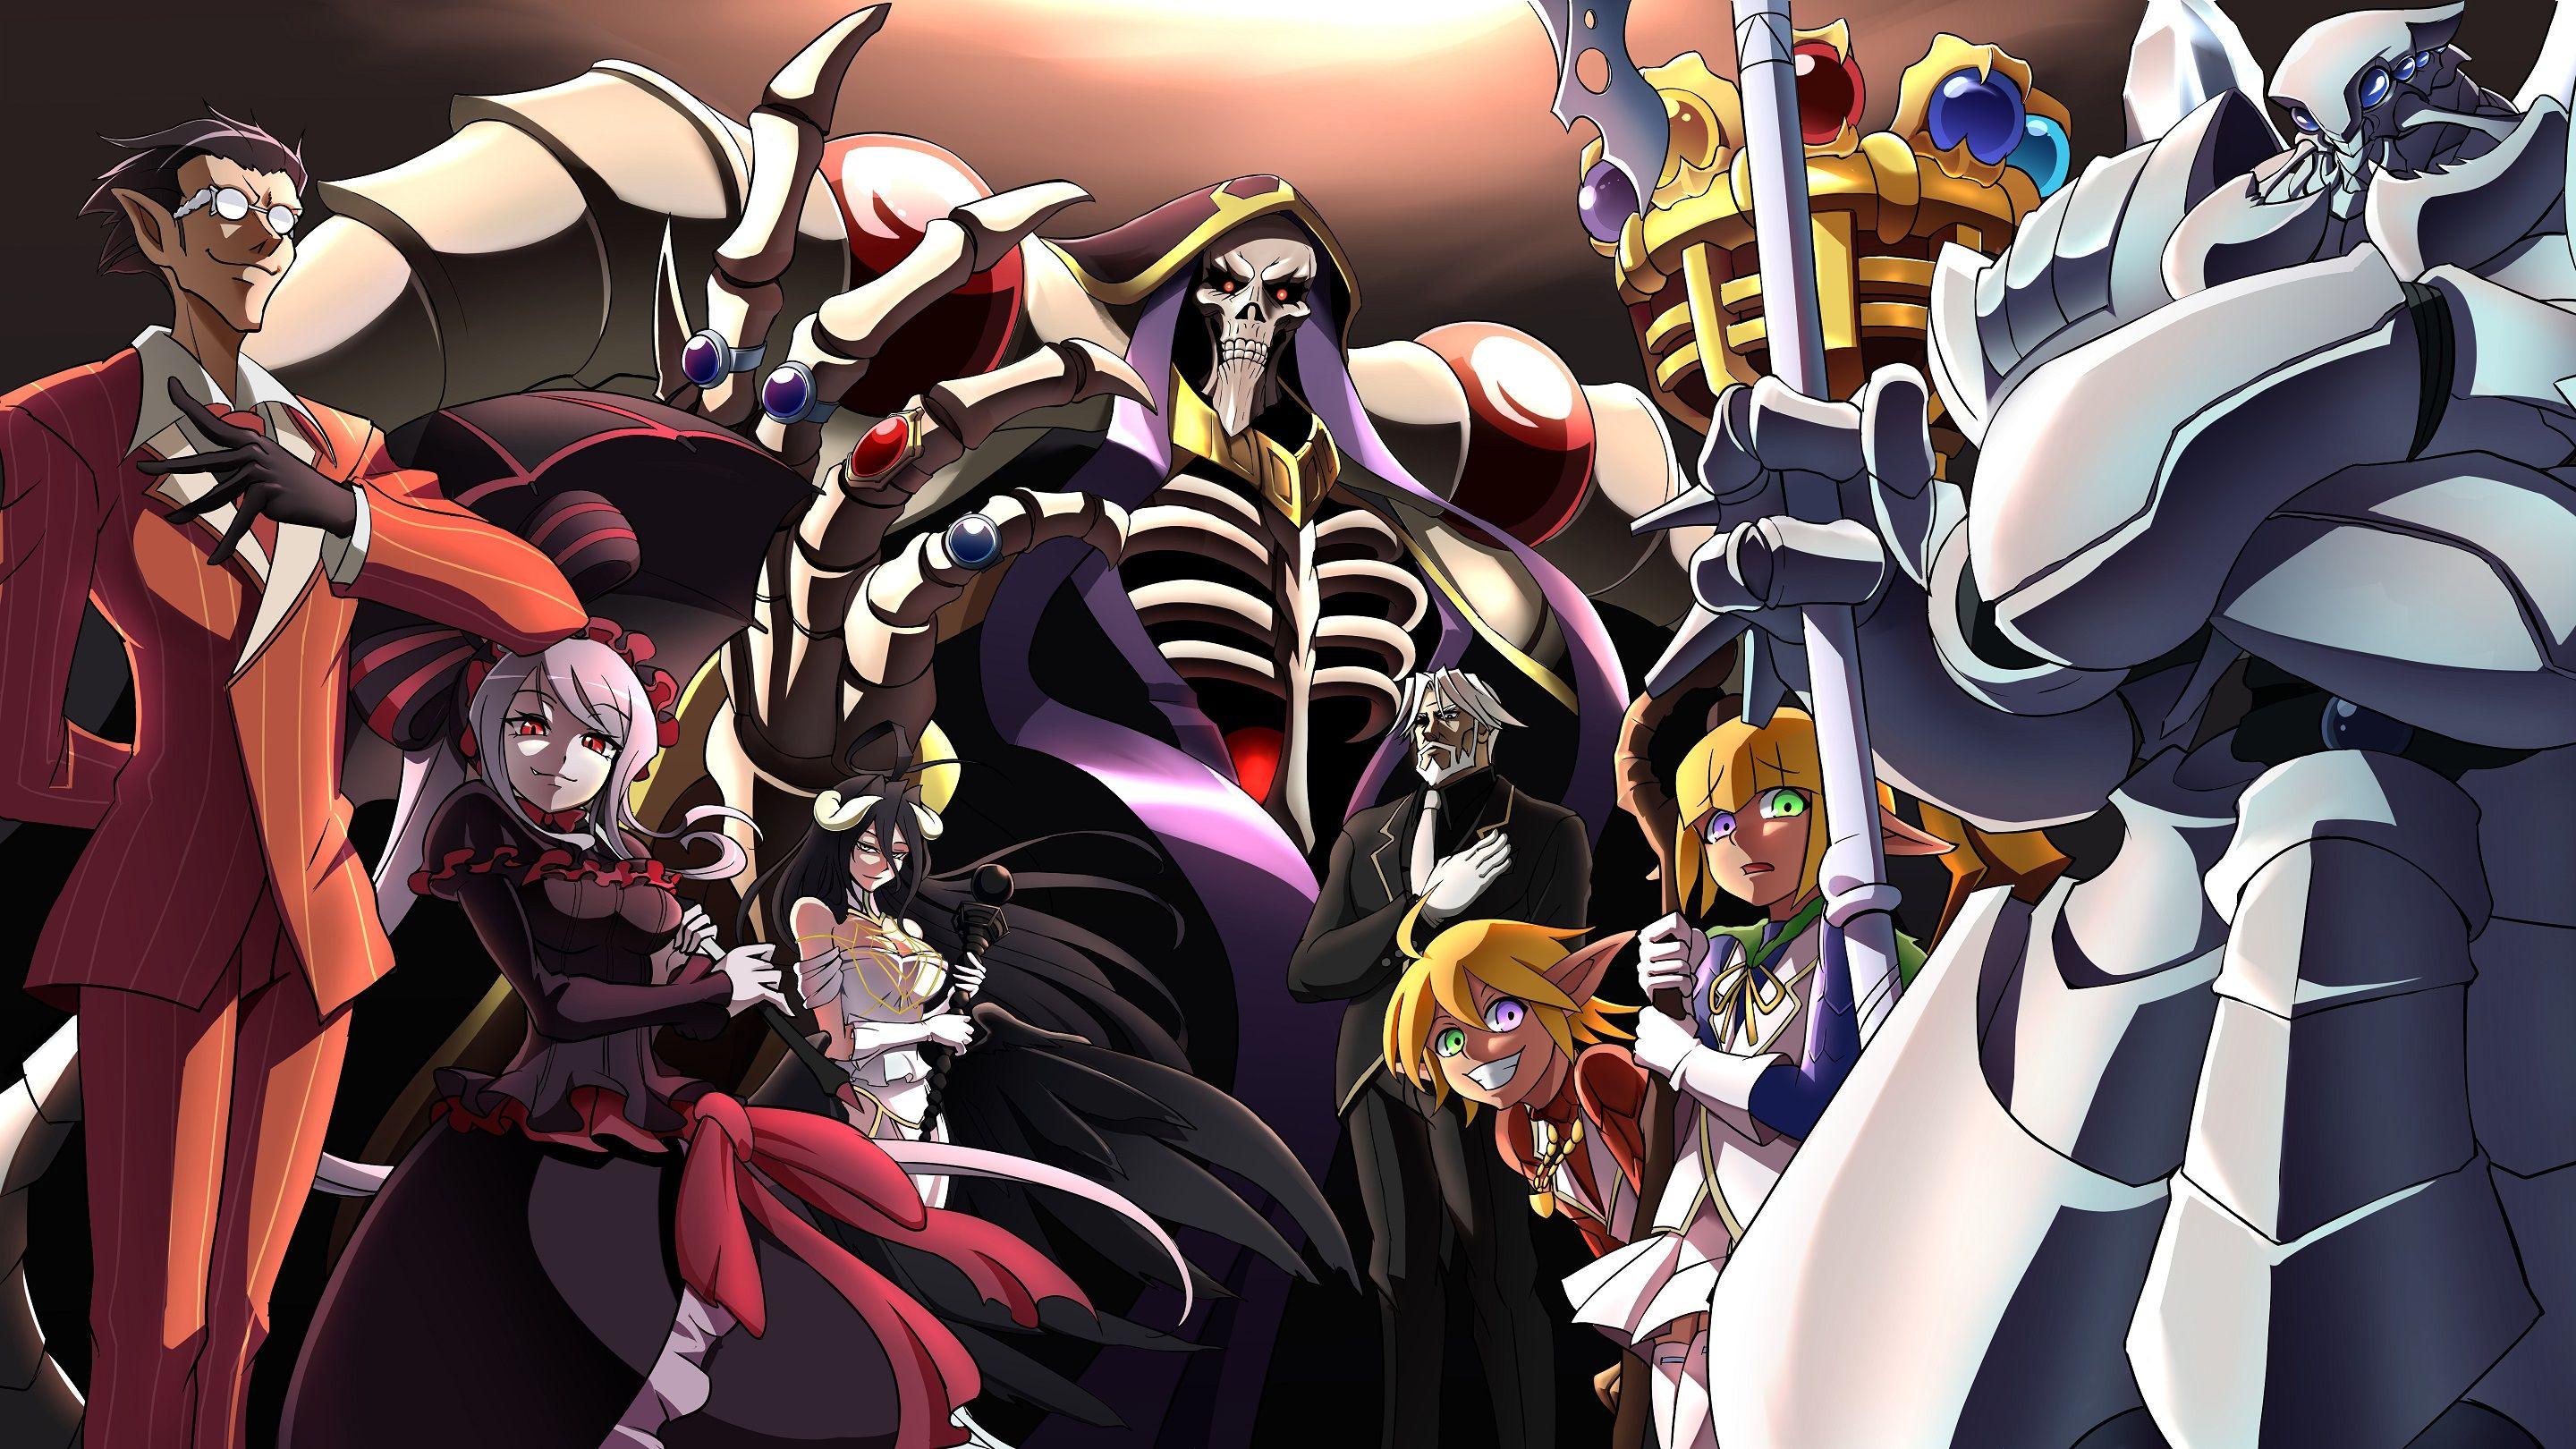 Overlord Anime Wallpapers Top Free Overlord Anime Backgrounds Wallpaperaccess